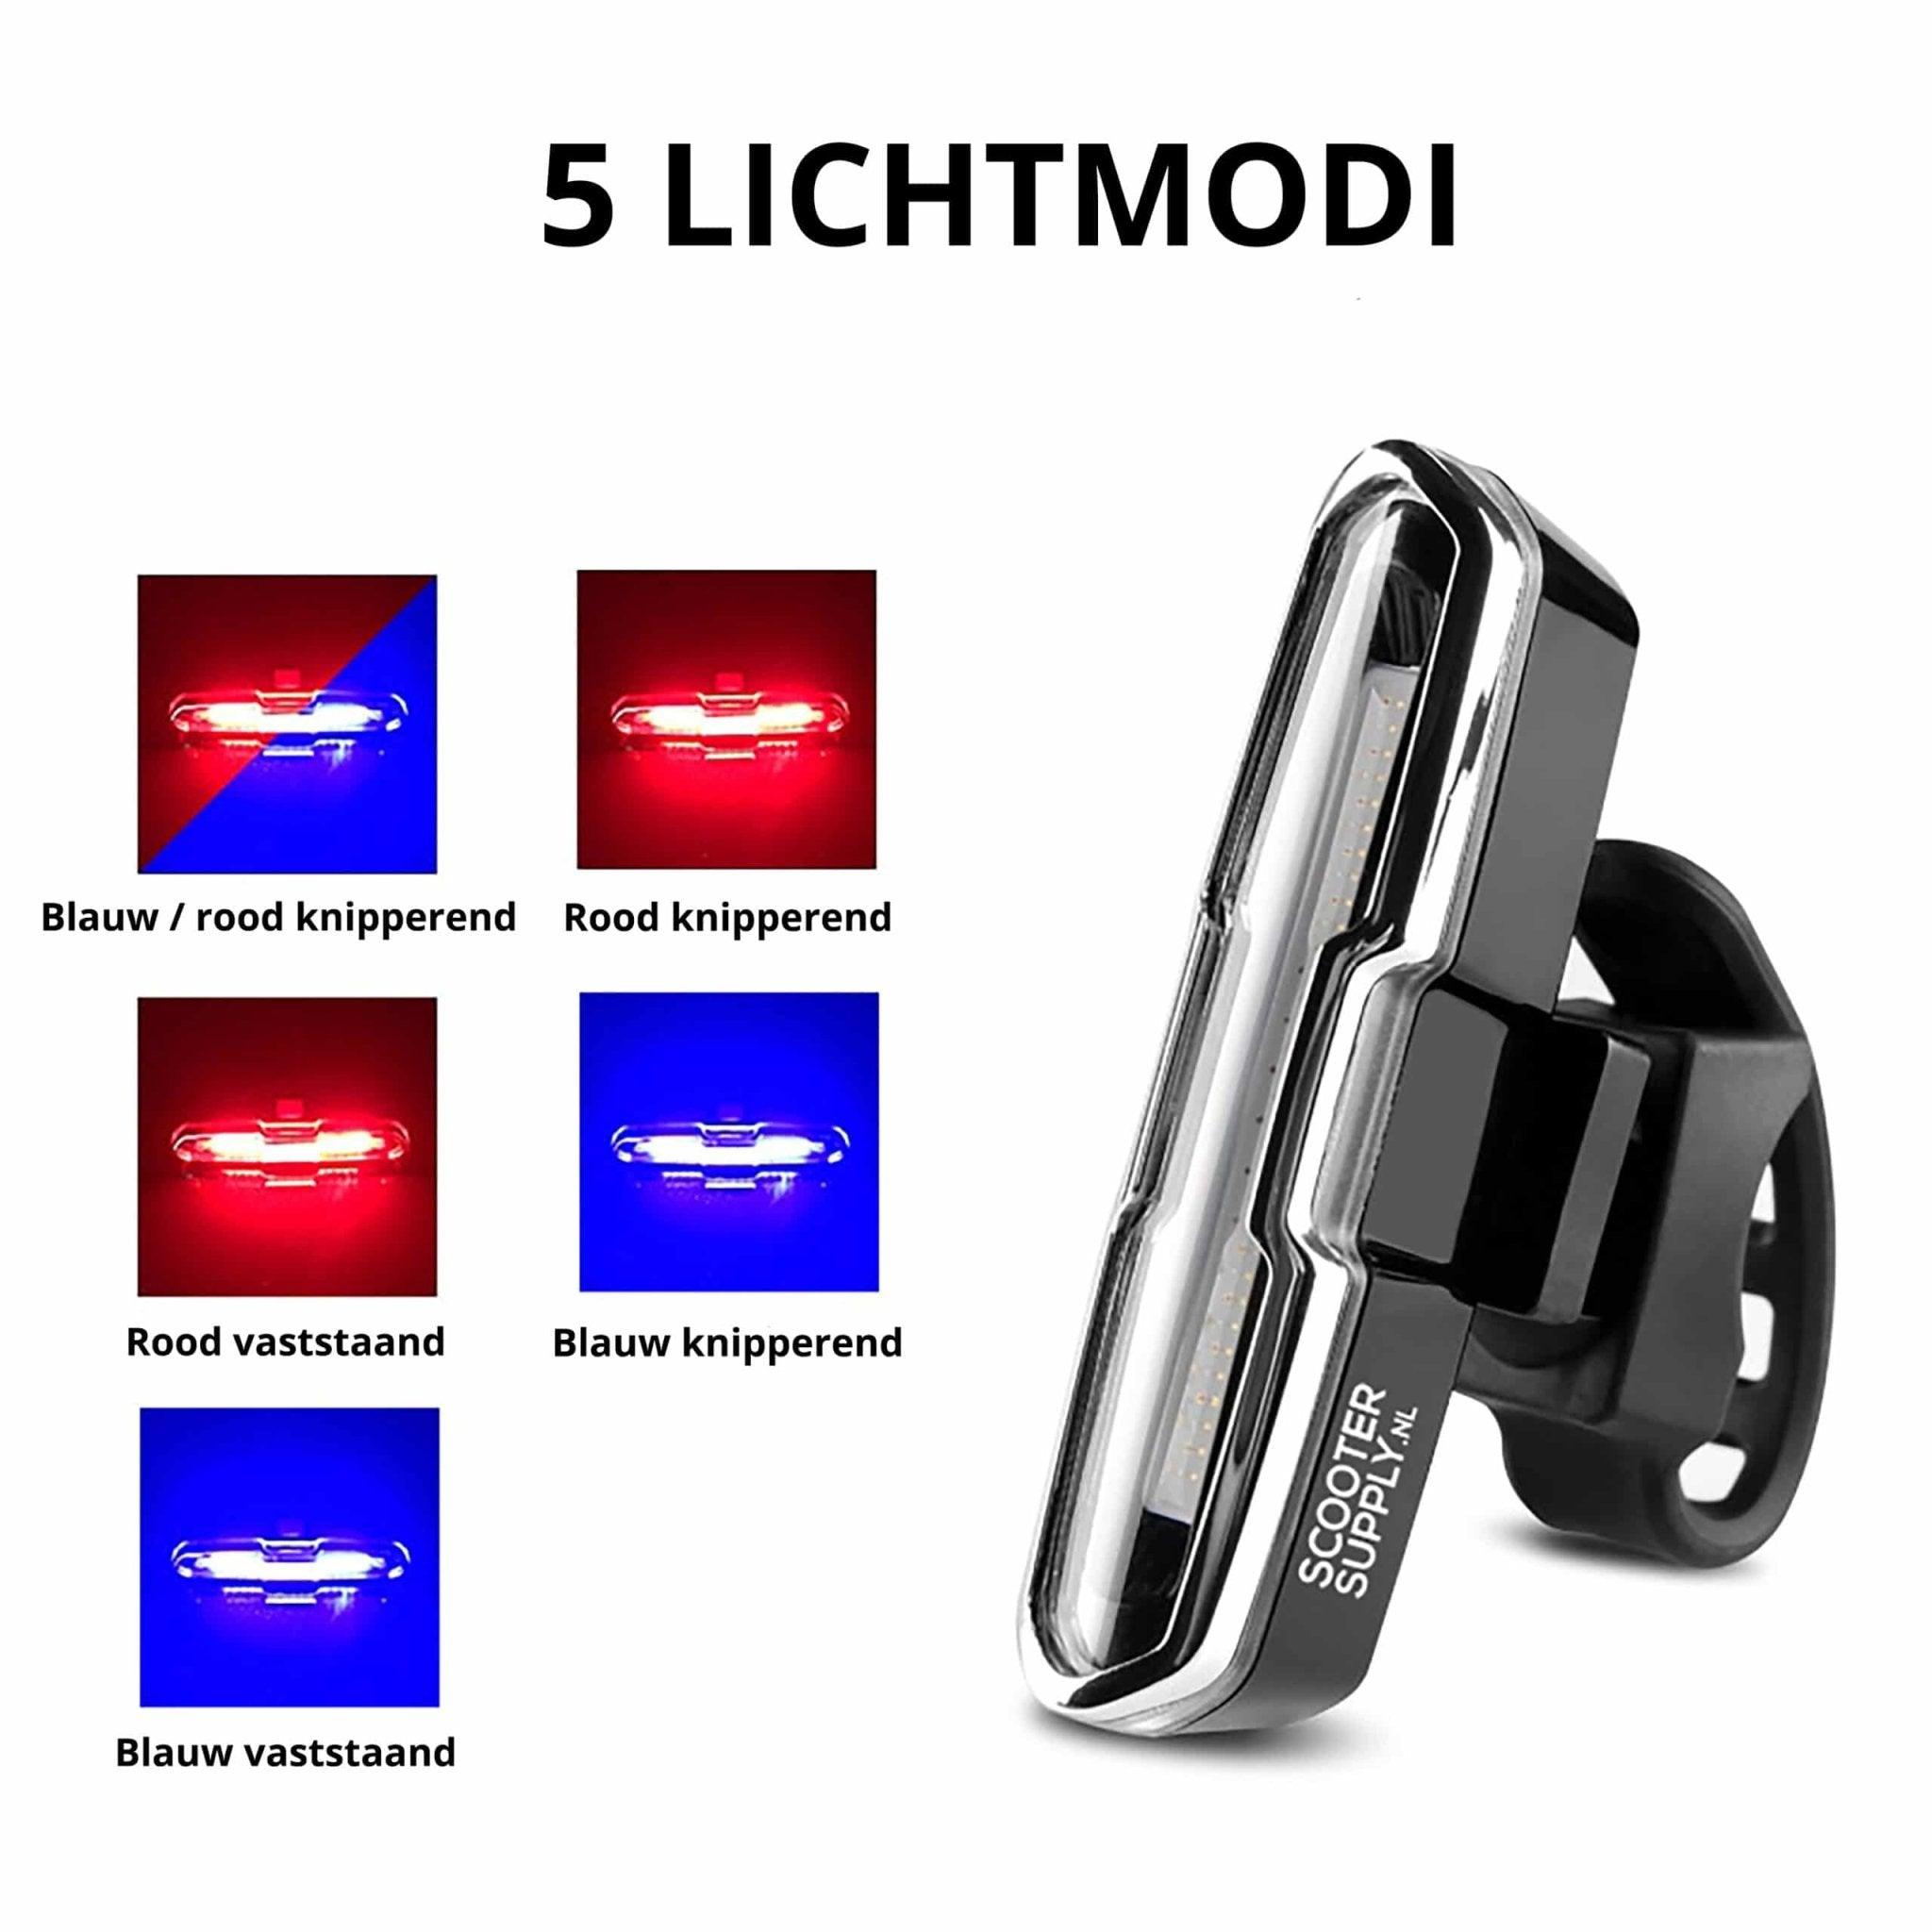 Politie LED Knipperlicht Blauw Rood - LED Customs